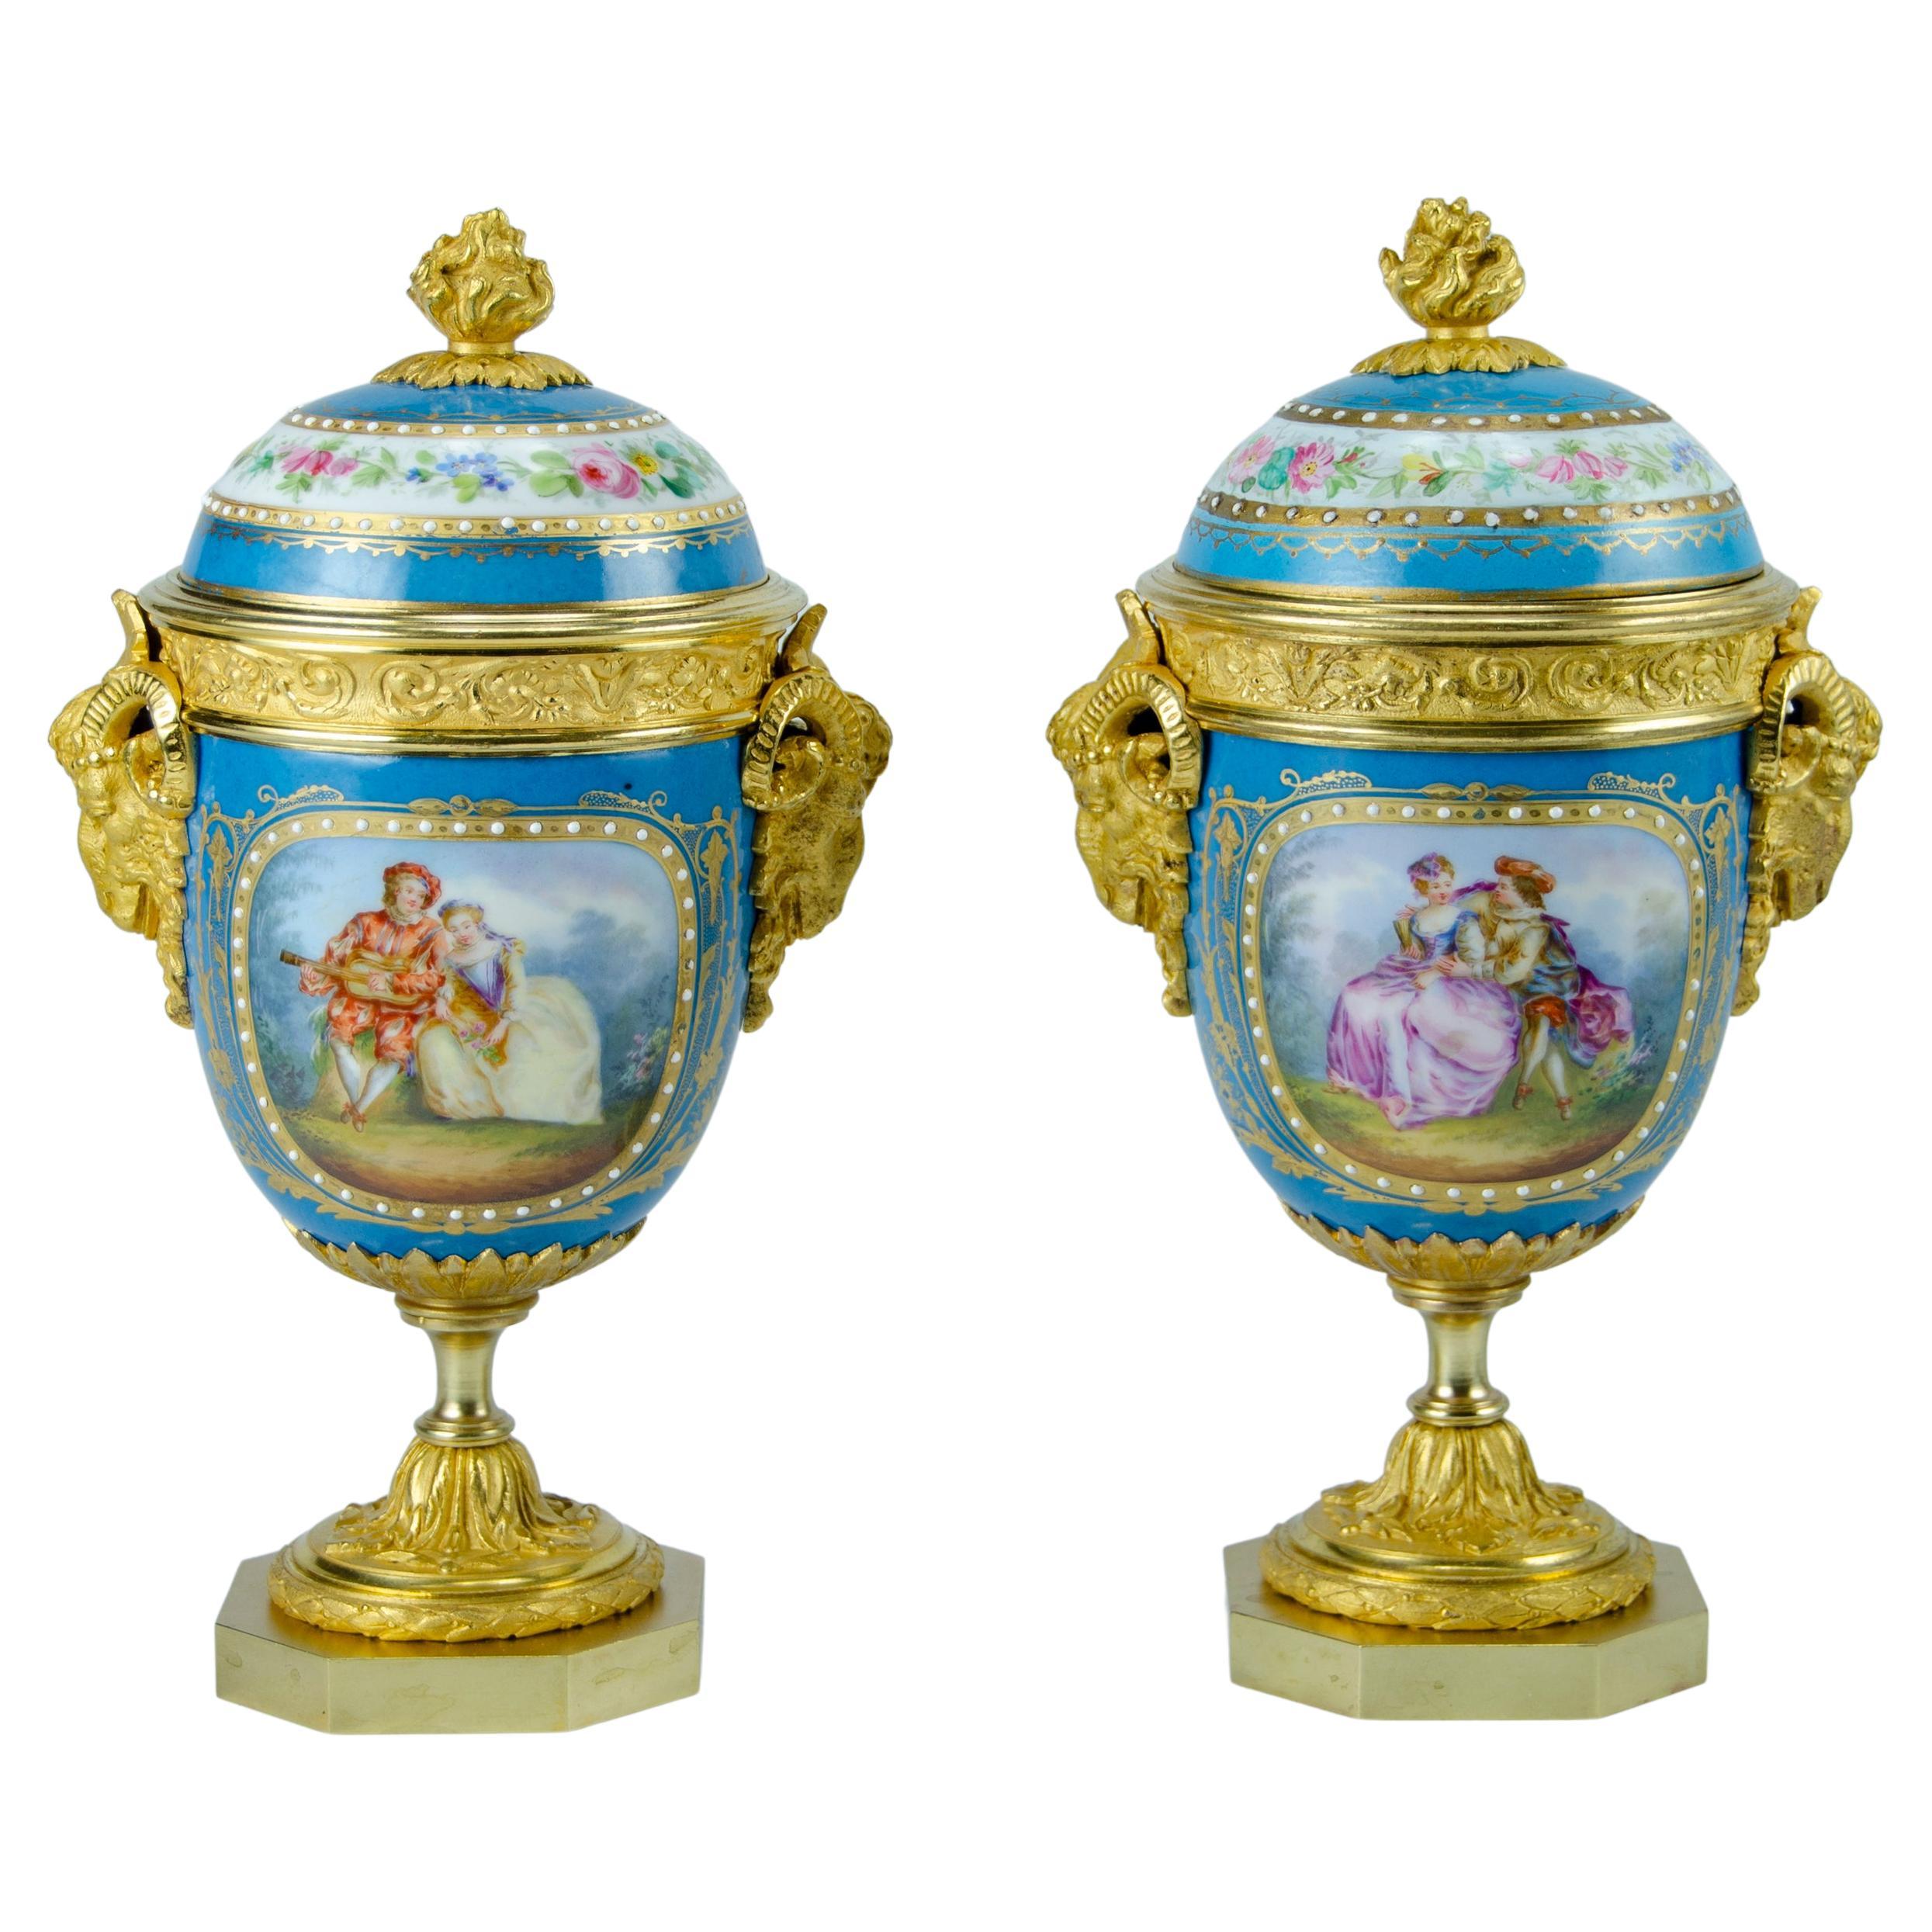 Pair of Turquoise Amphorae Attributed to Sevres